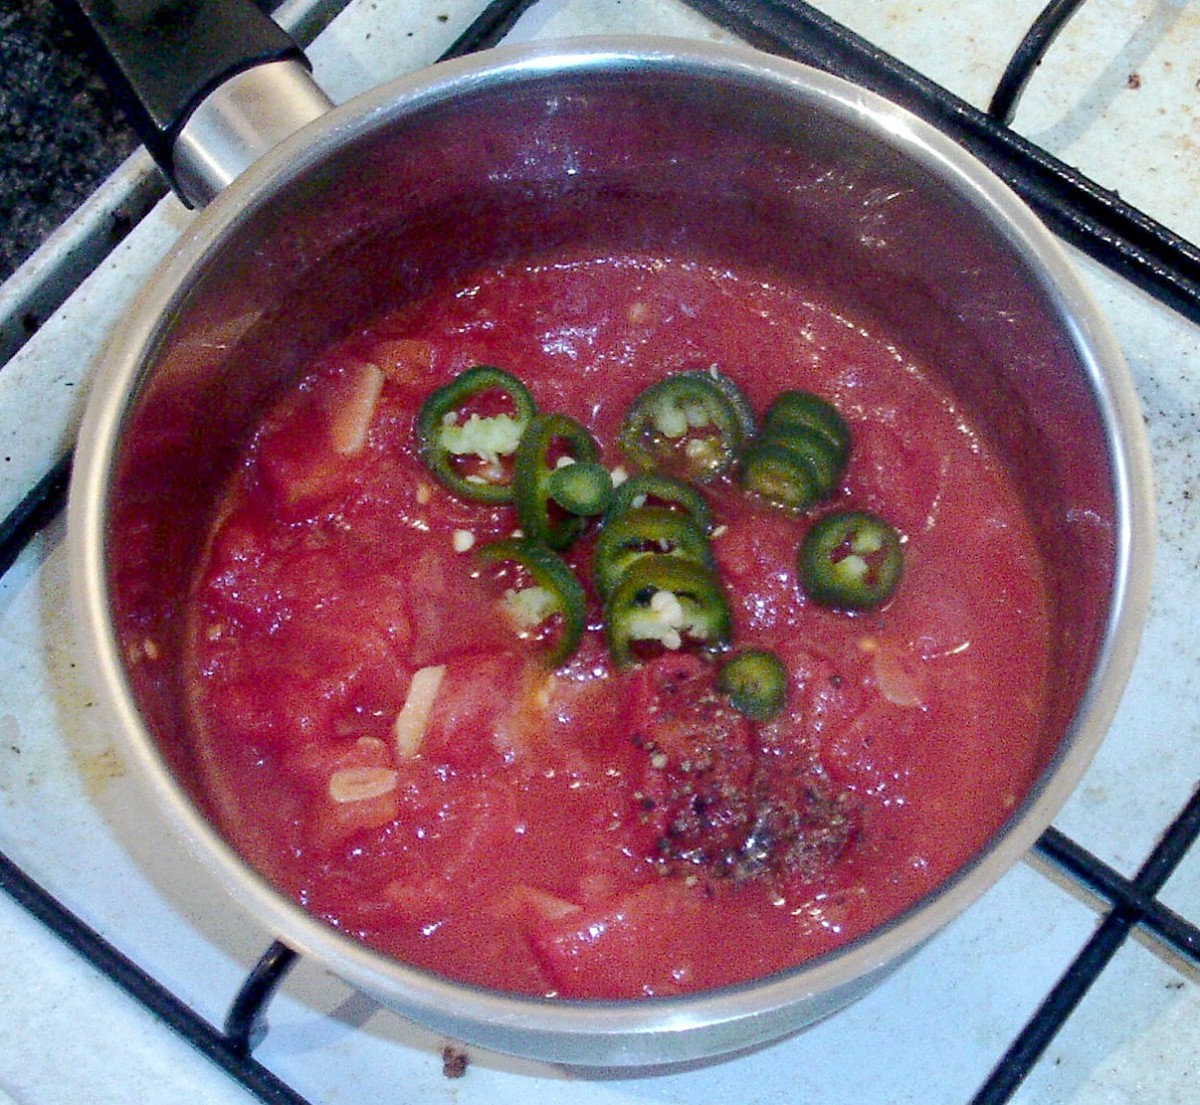 Sliced chilli and seasonings are added to saucepan